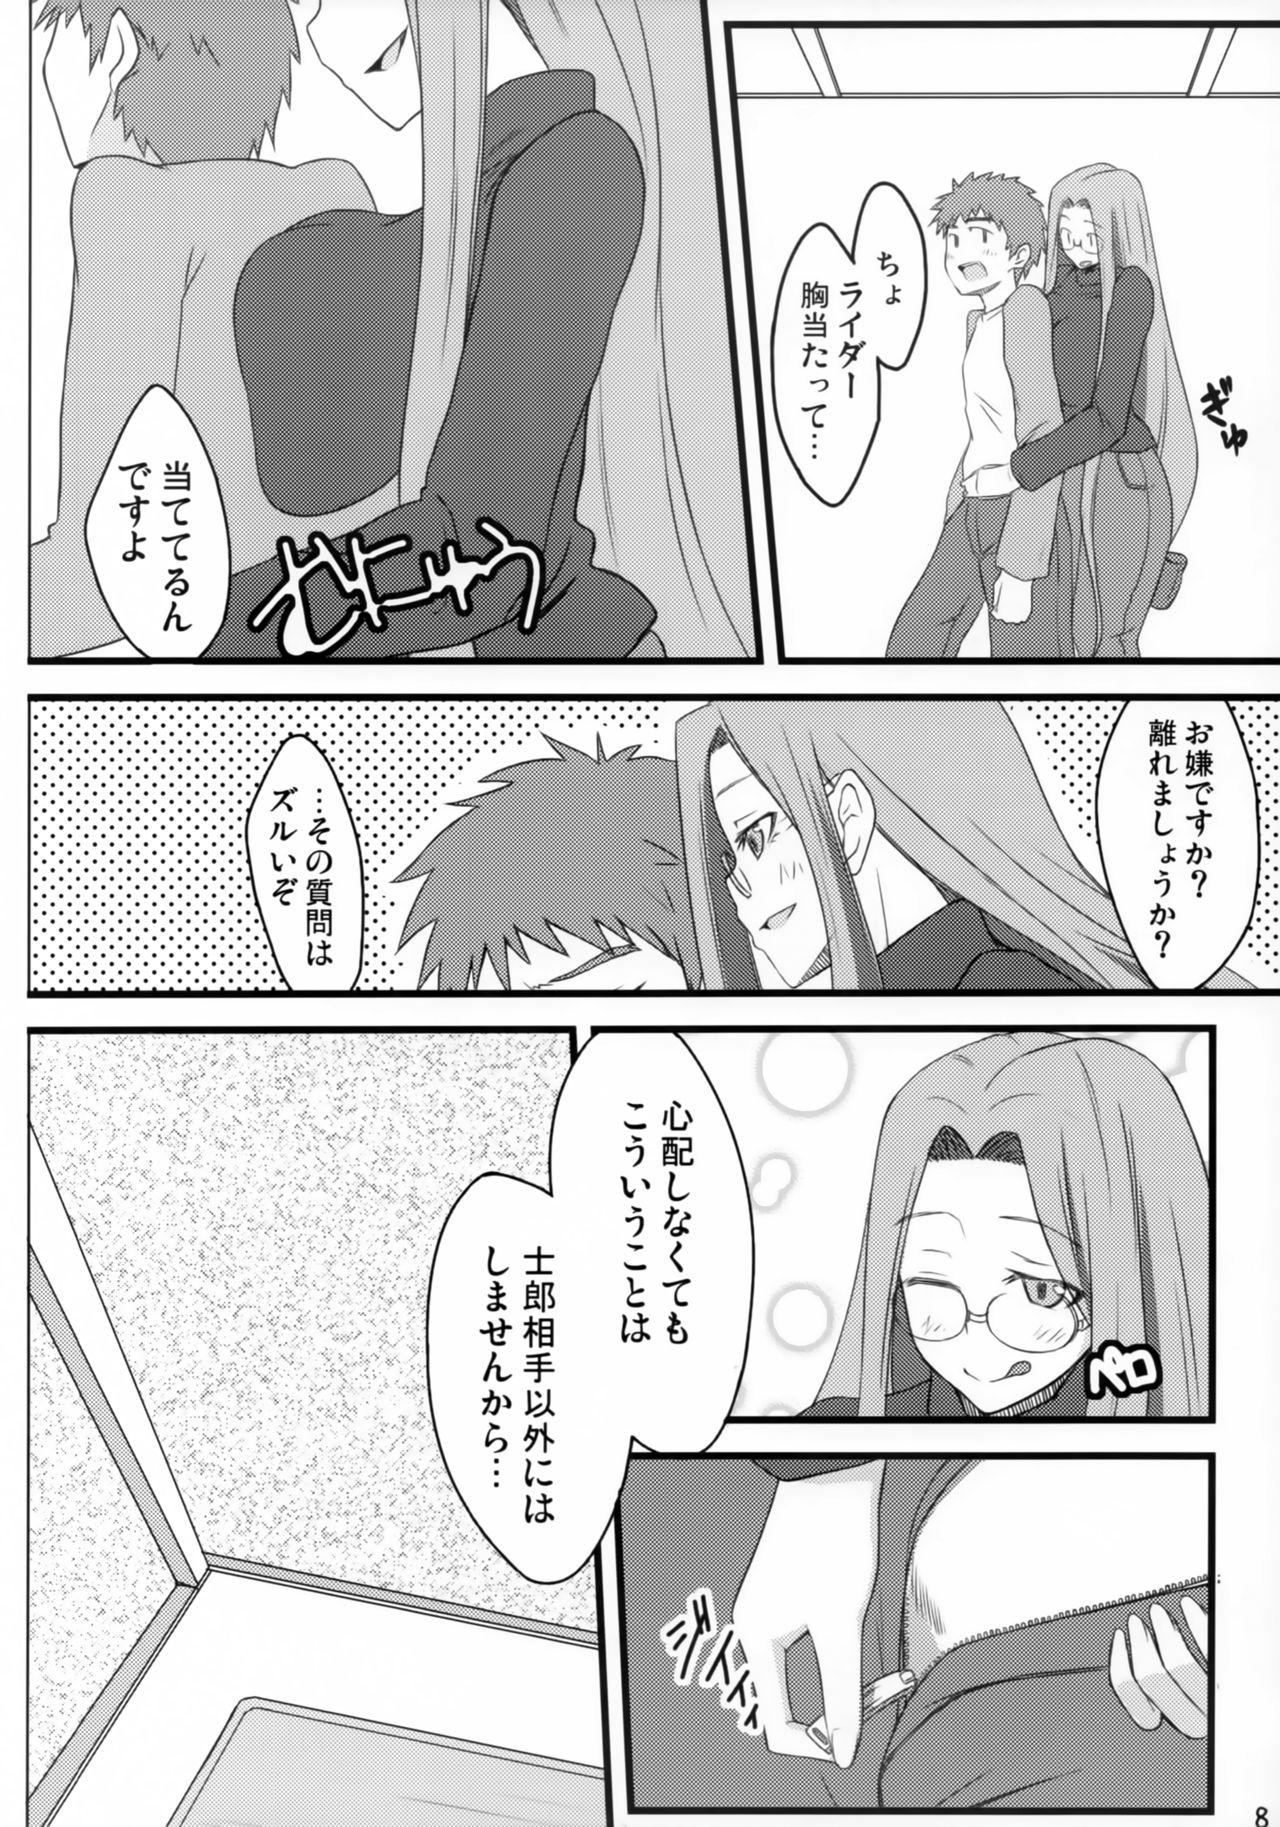 Macho R4 - Fate stay night Longhair - Page 7